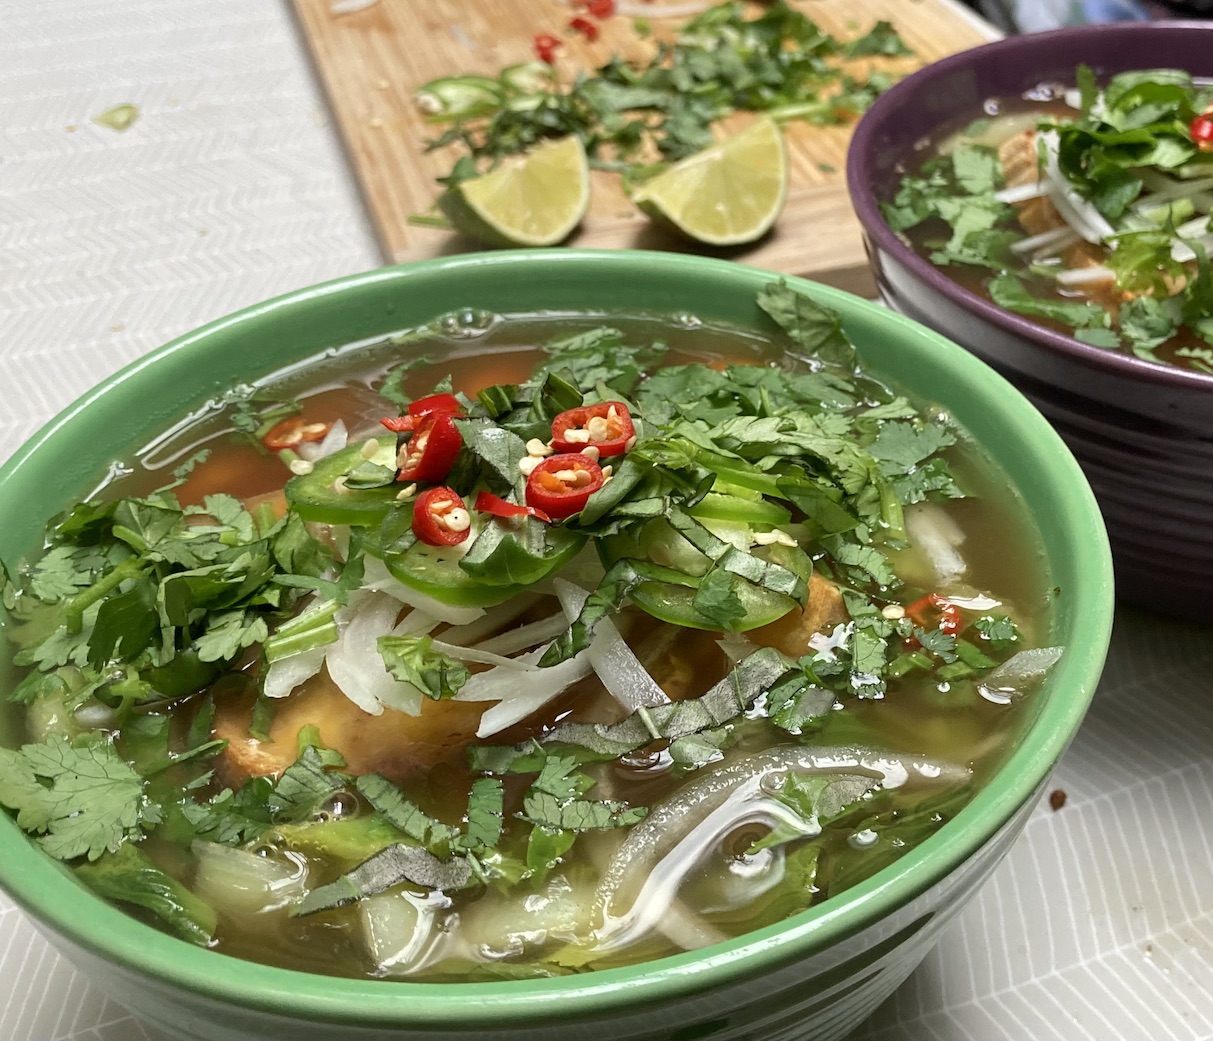 A green bowl full of southeast Asian-style noodle soup full of red chilies, cilantro, and limes.